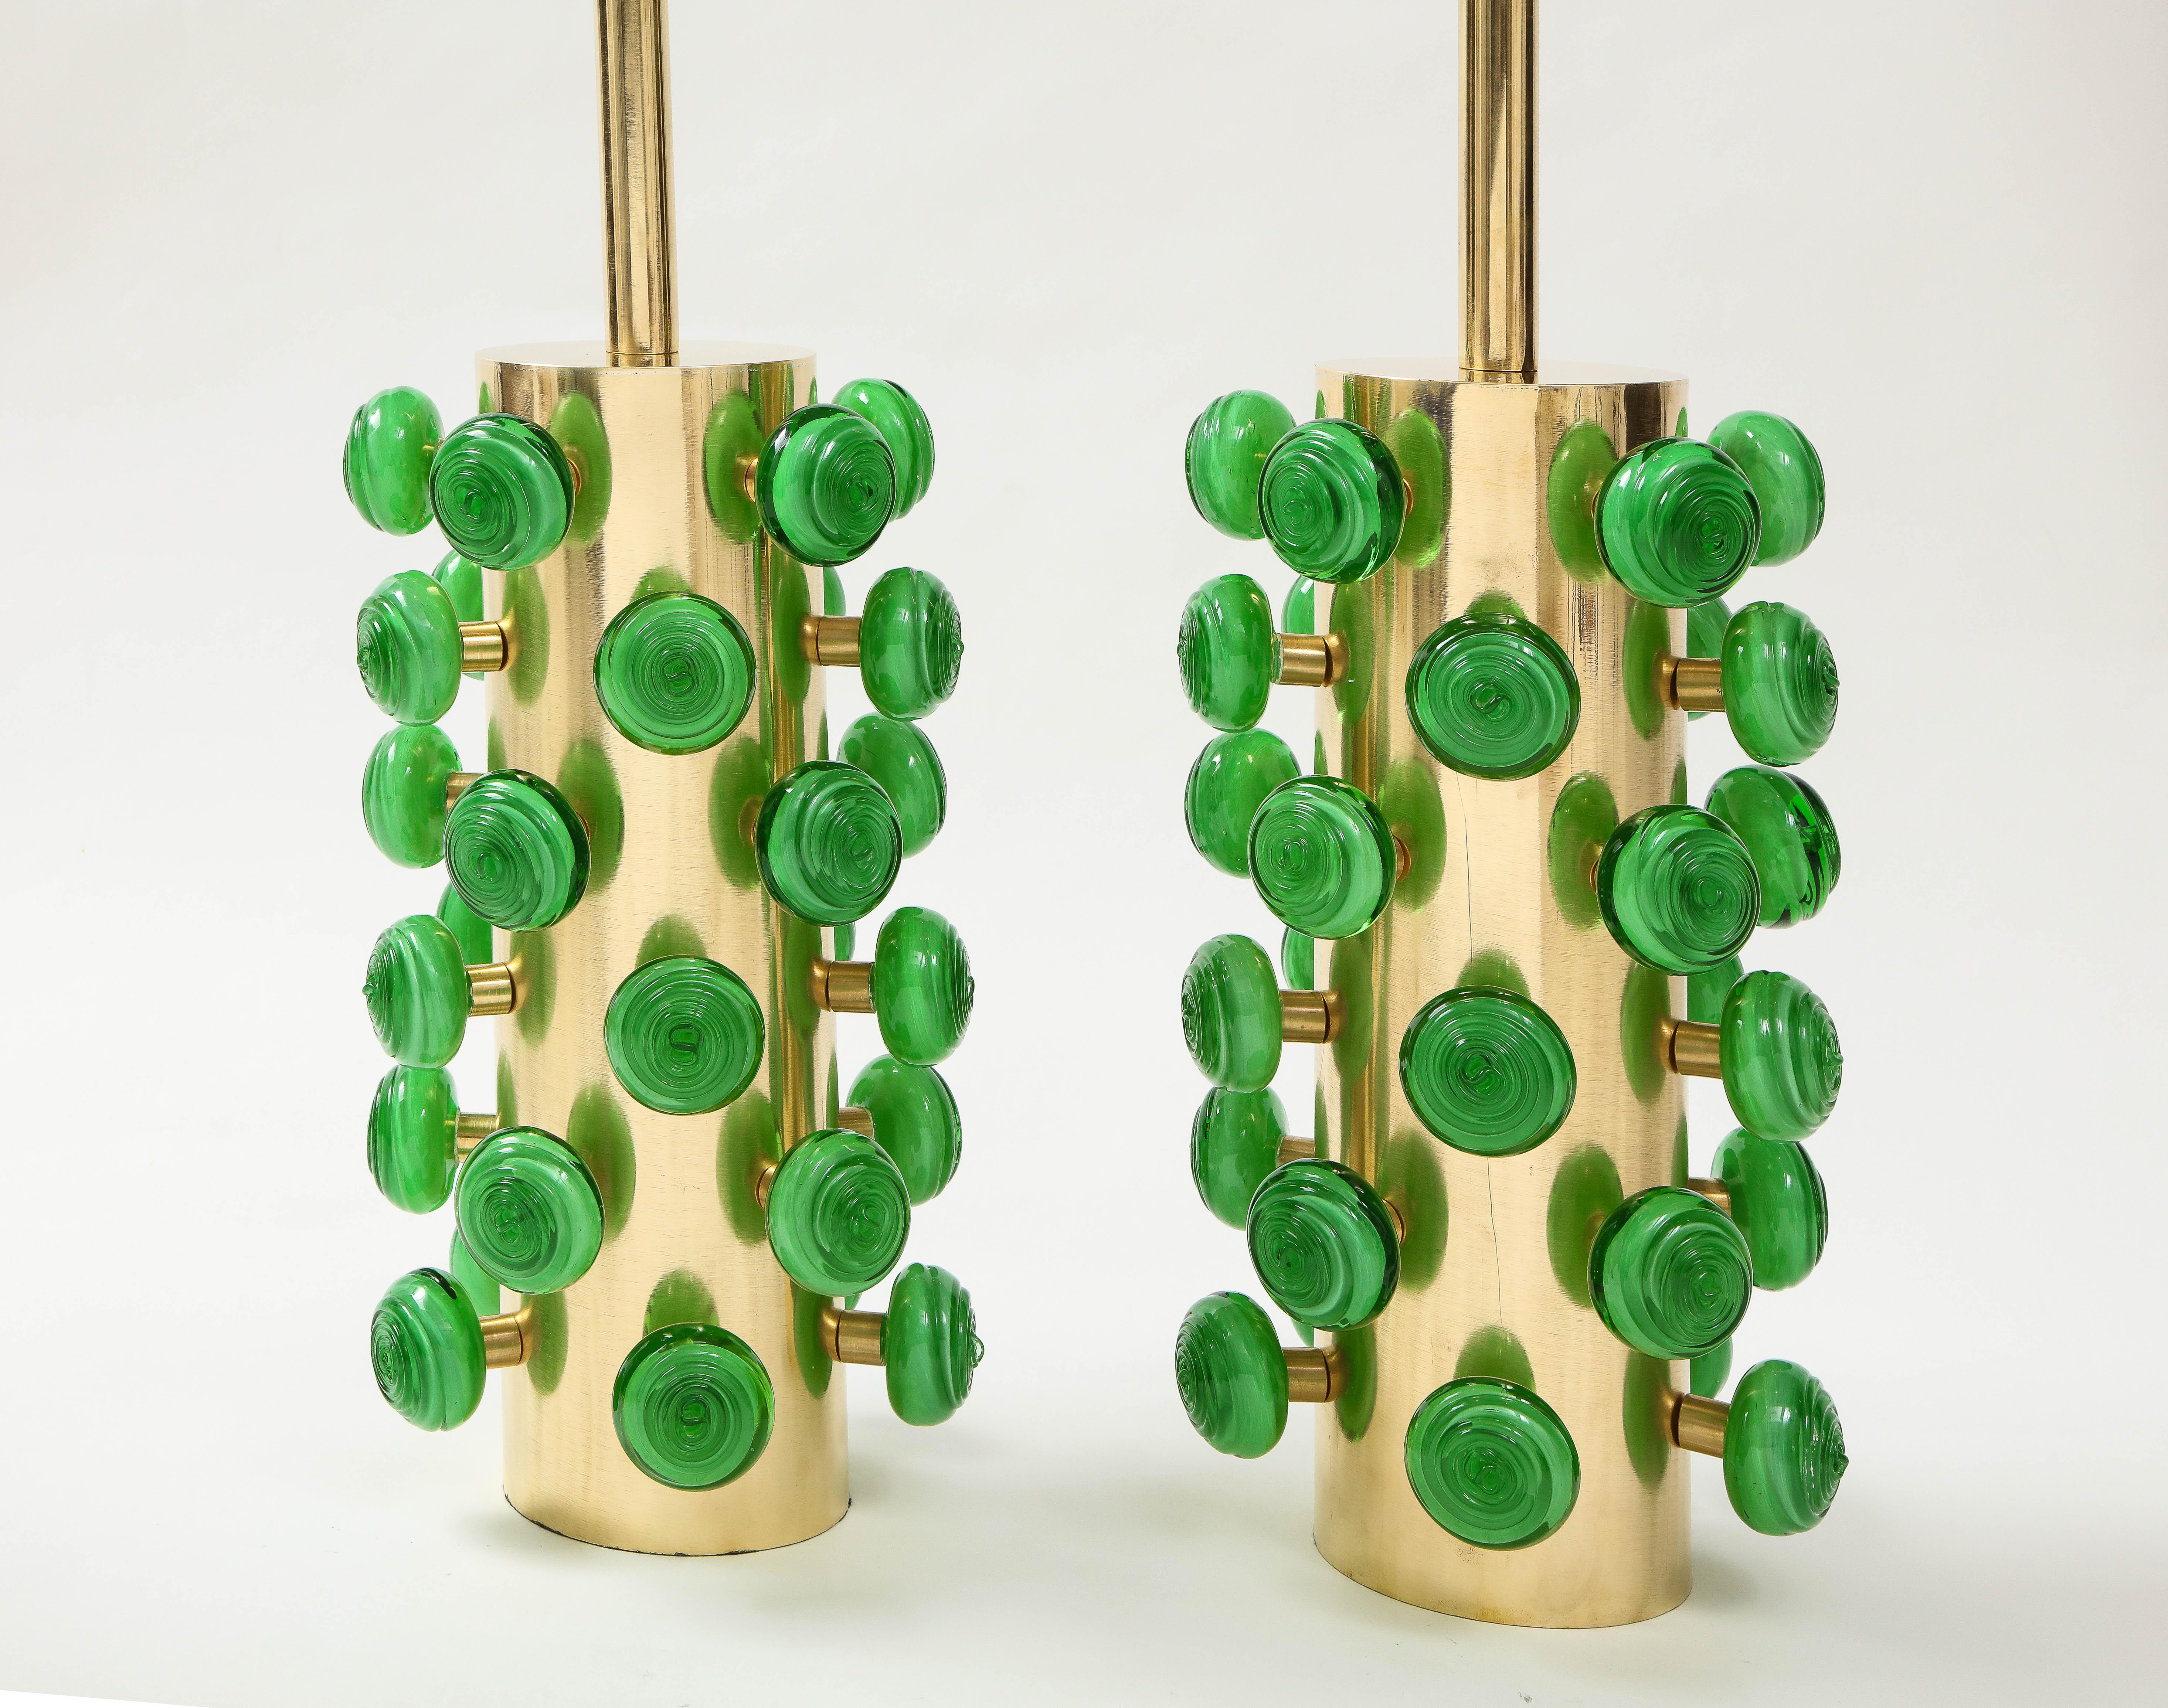 One of a kind pair of tall sculptural brass cylinder lamps with kelly green swirl glass knobs. Hand-casted Kelly green Murano round glass with a swirl texture are screwed on brass stems projecting from the lamp base, thereby creating a 3 dimensional